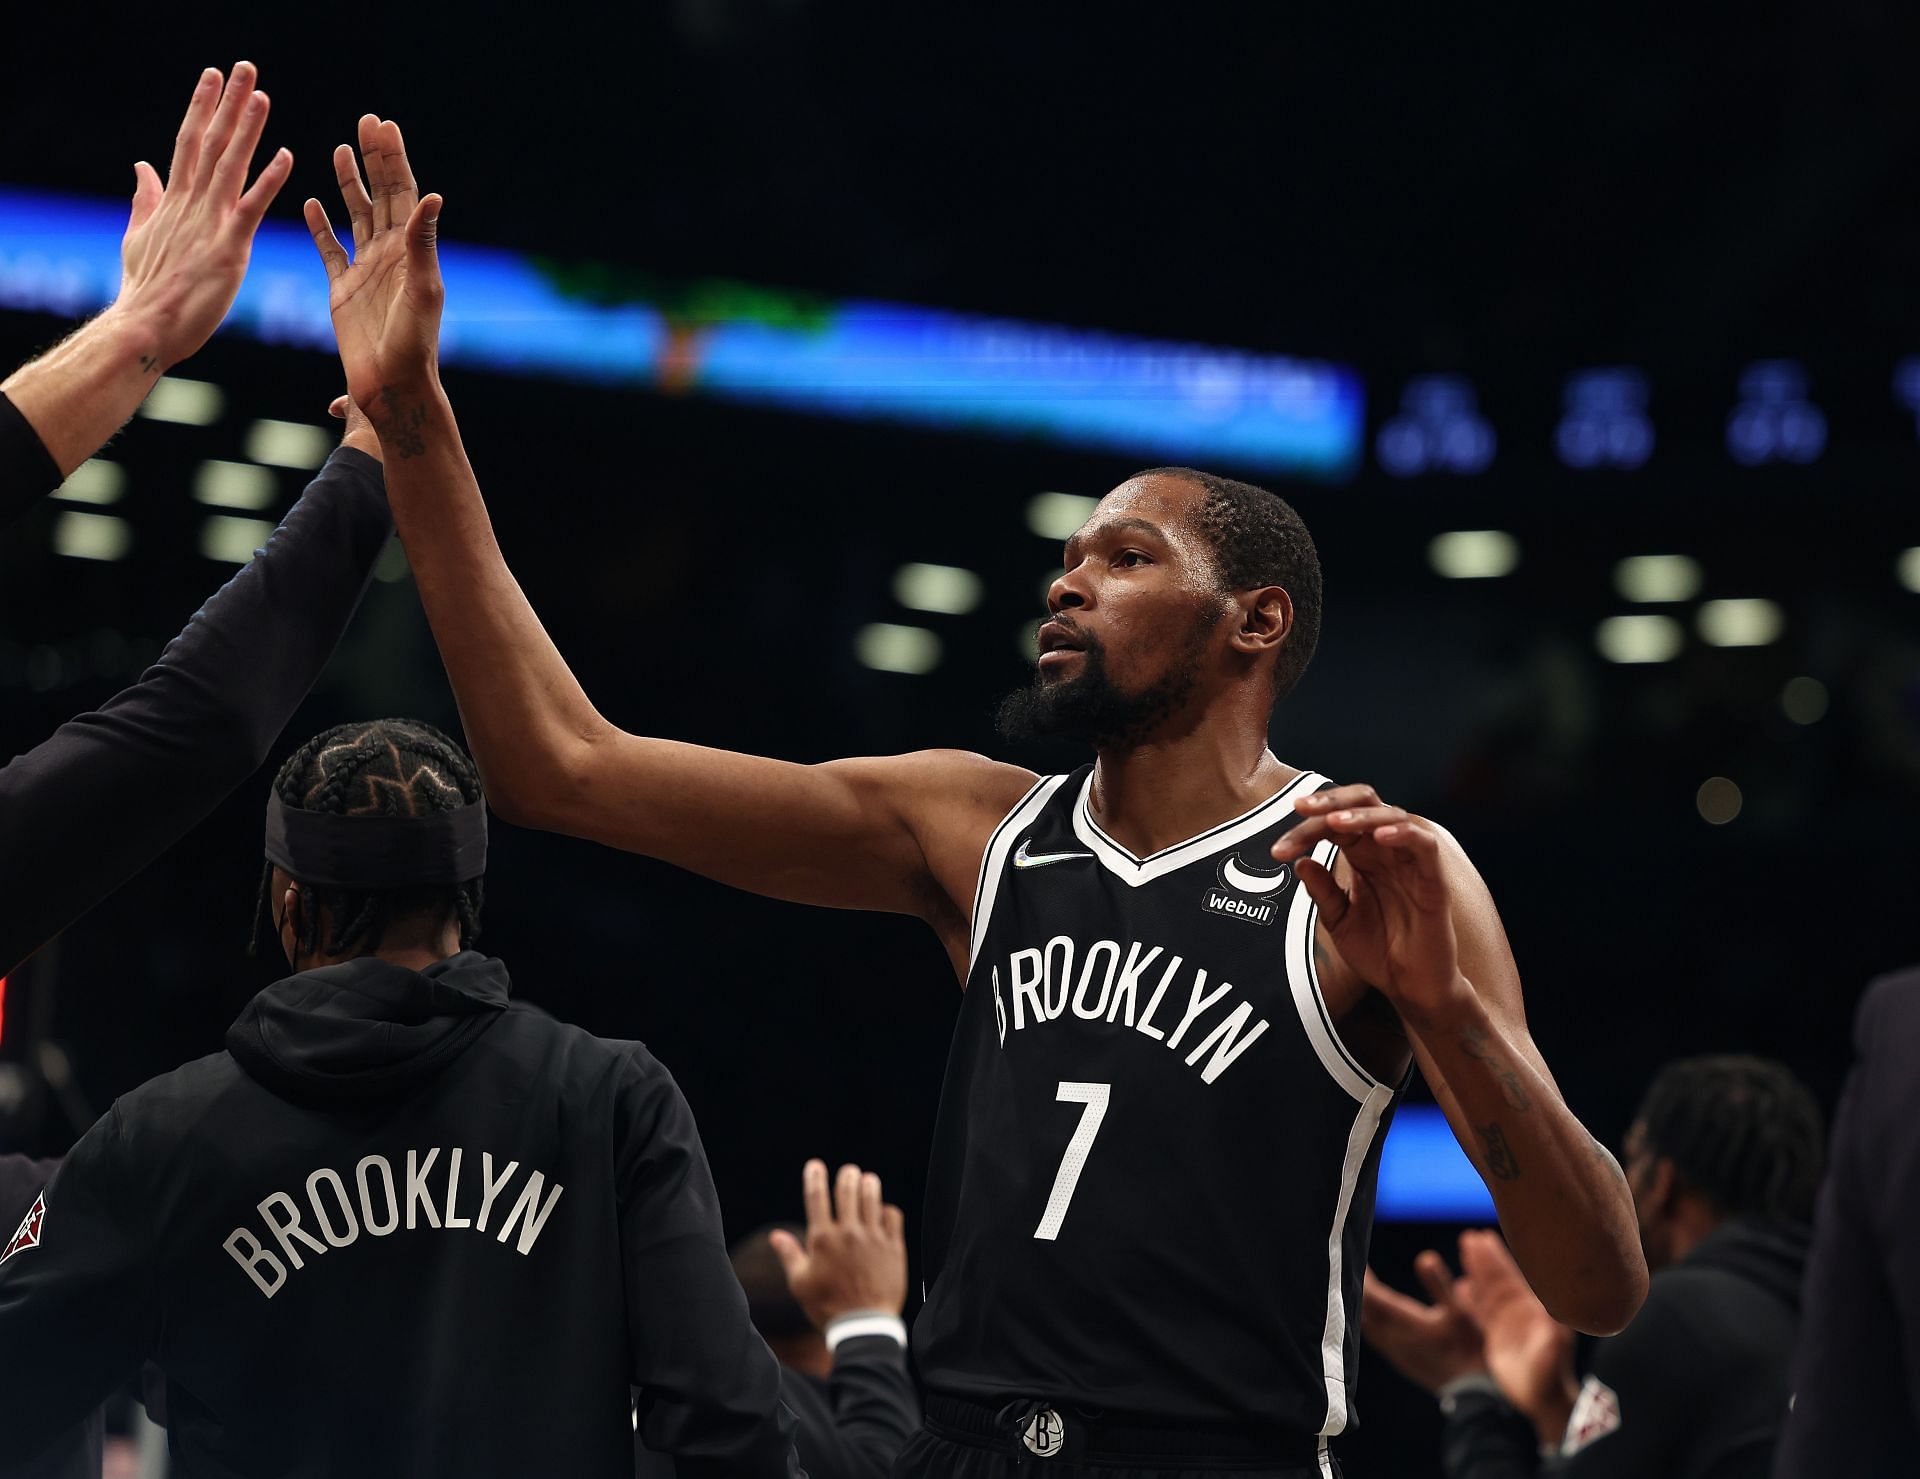 Kevin Durant of the Brooklyn Nets celebrates a basket against the New Orleans Pelicans.